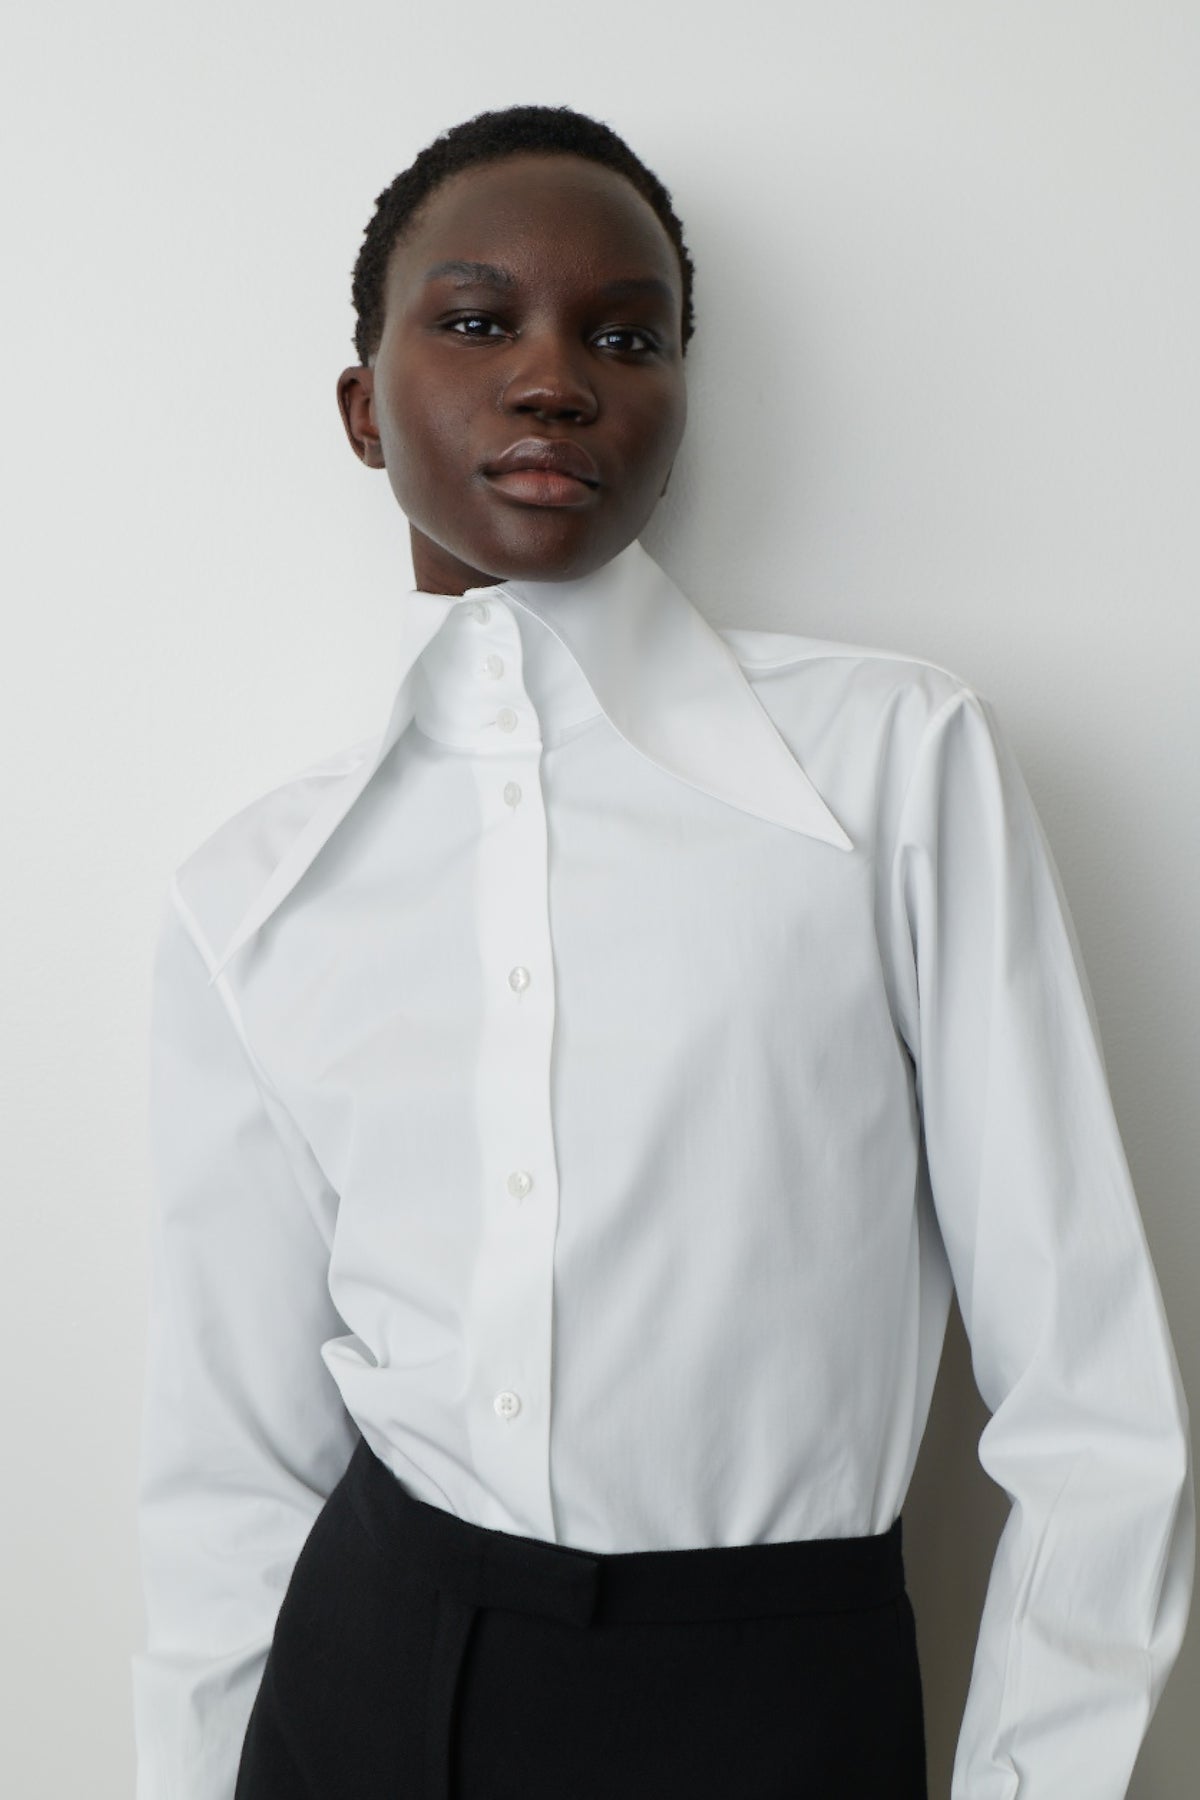 Armelle Shirt in Cotton